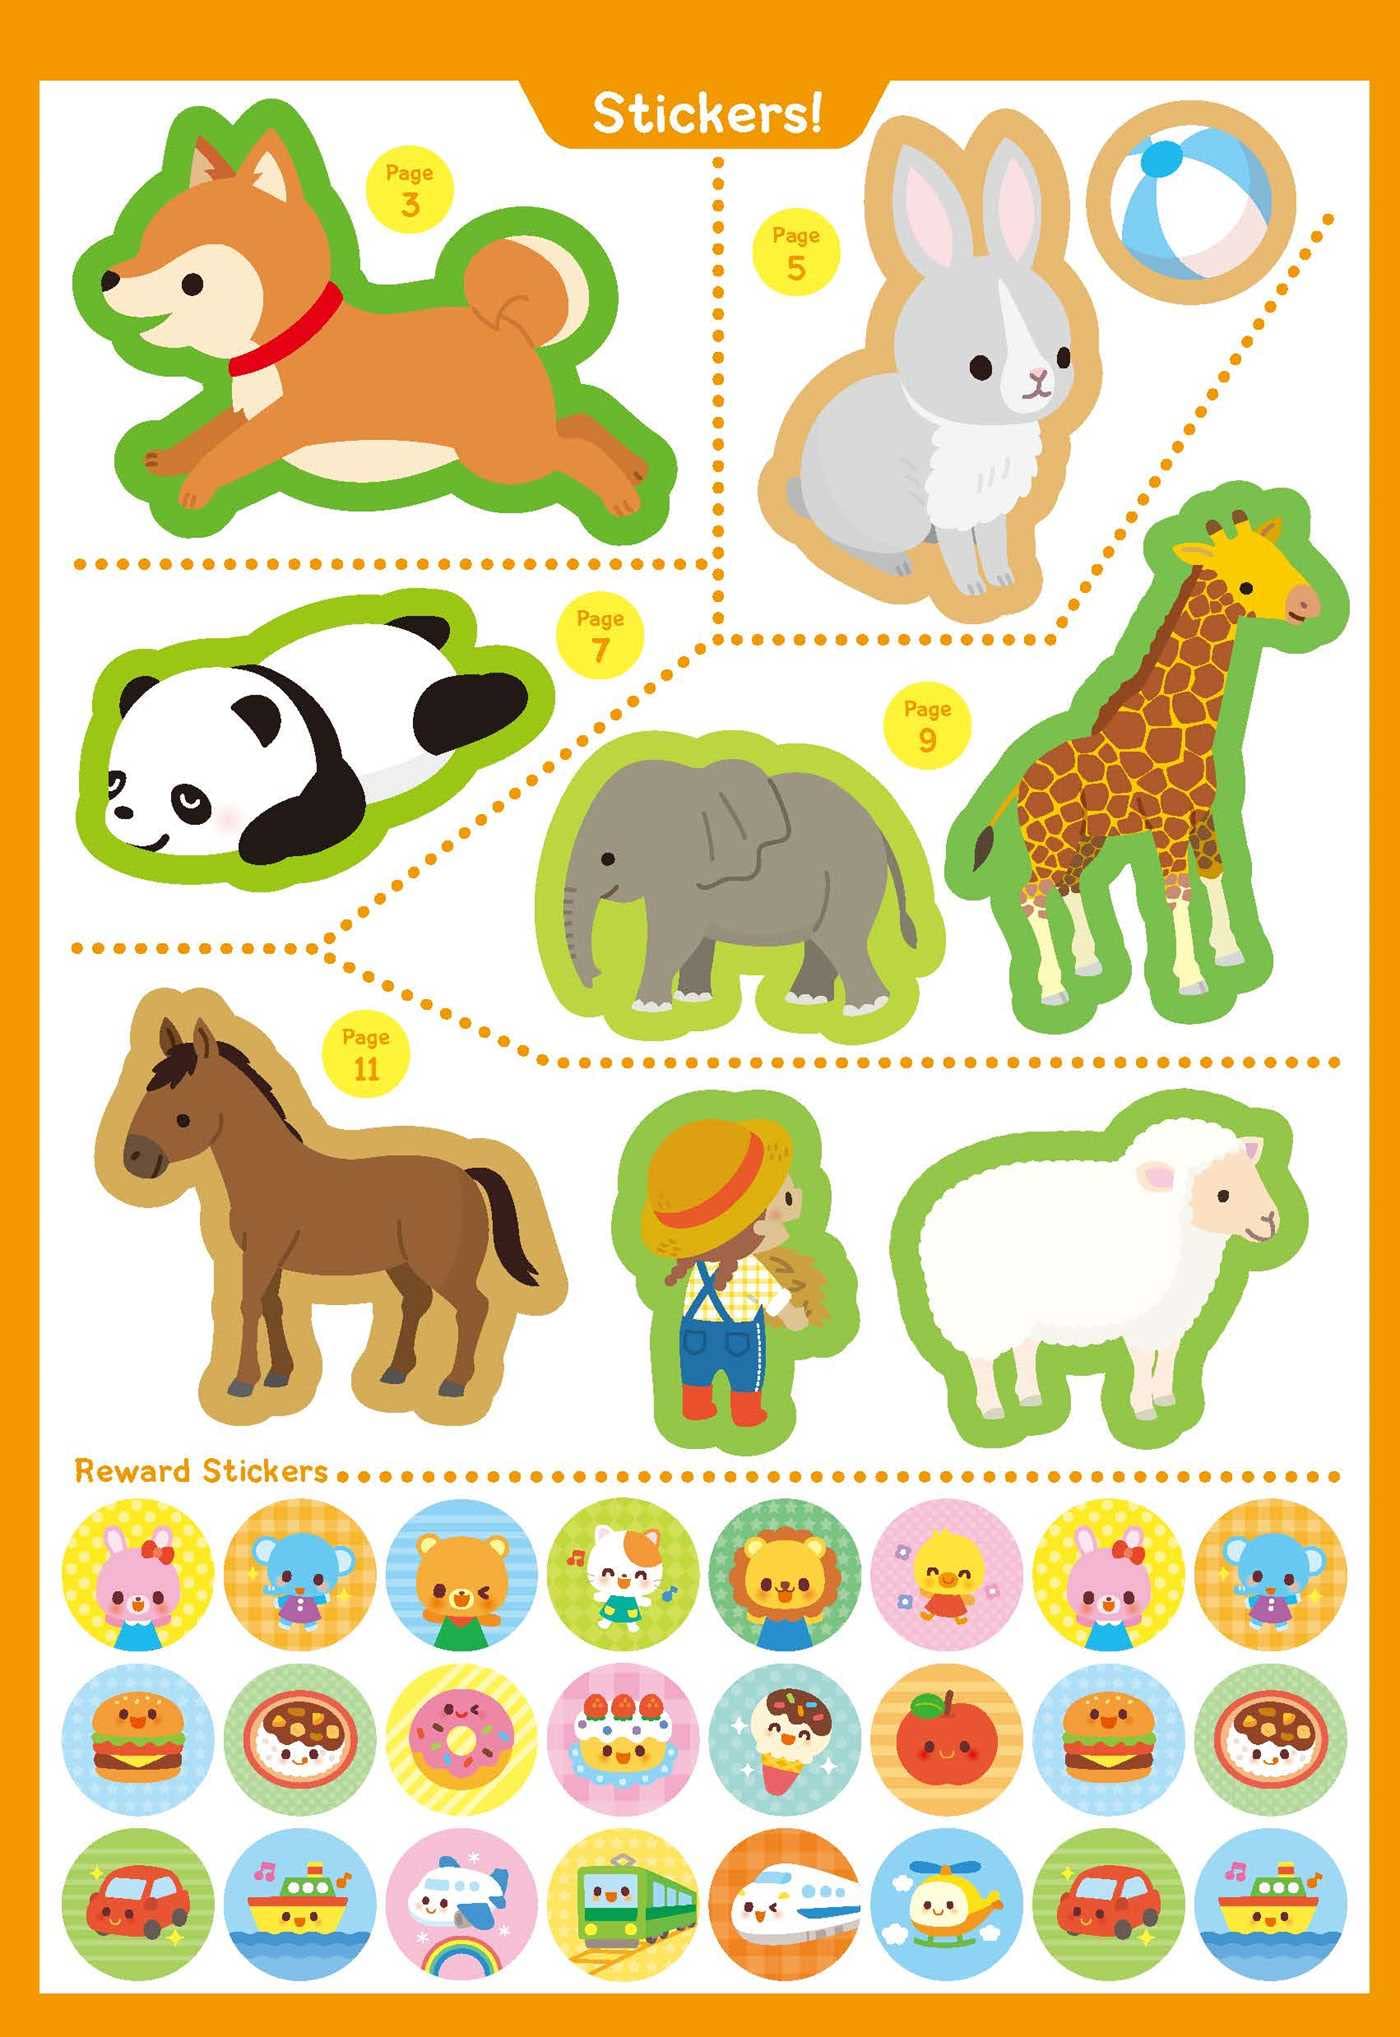 Play Smart My First STICKER BOOK 2+: Preschool Activity Workbook with 200+ Stickers for children with small hands Ages 2, 3, 4: Fine Motor Skills (Mom's Choice Award Winner)